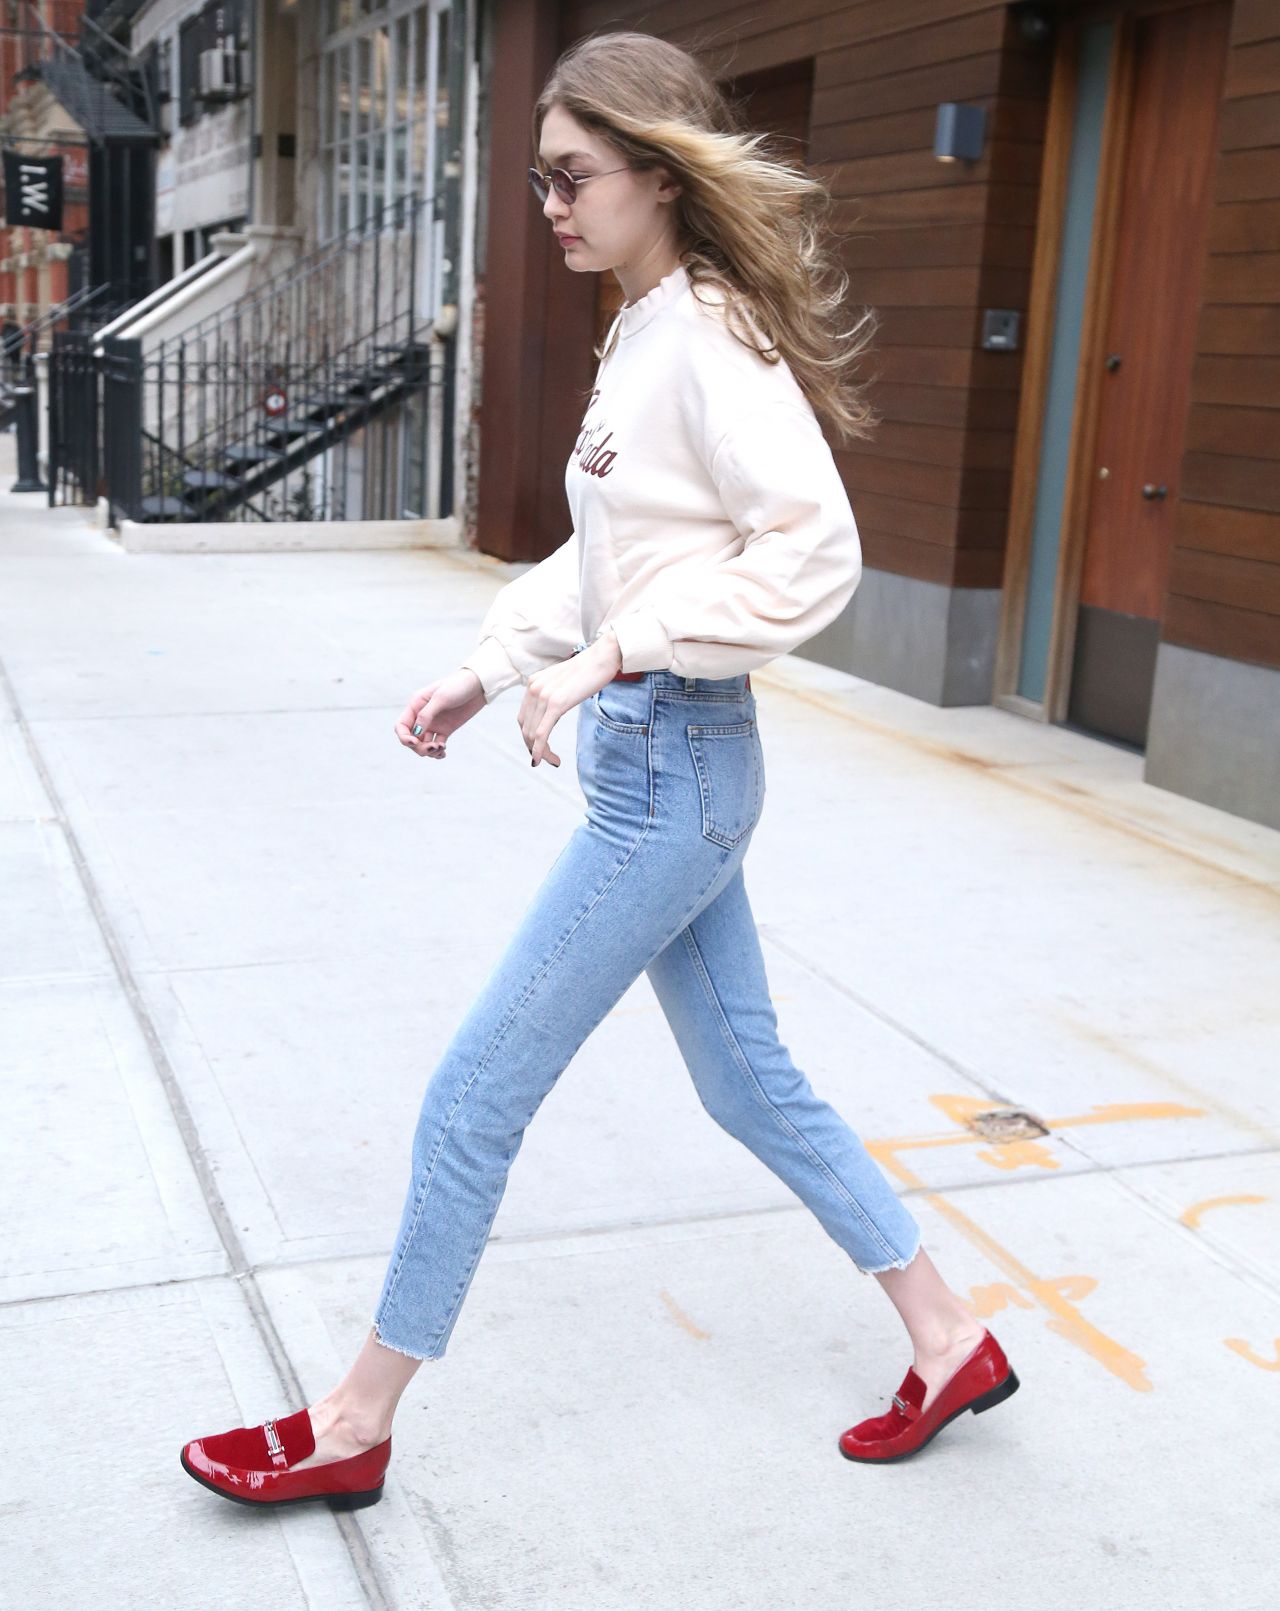 Gigi Hadid Pina Colada Sweatshirt and Red Shoes For Less - The Budget Babe